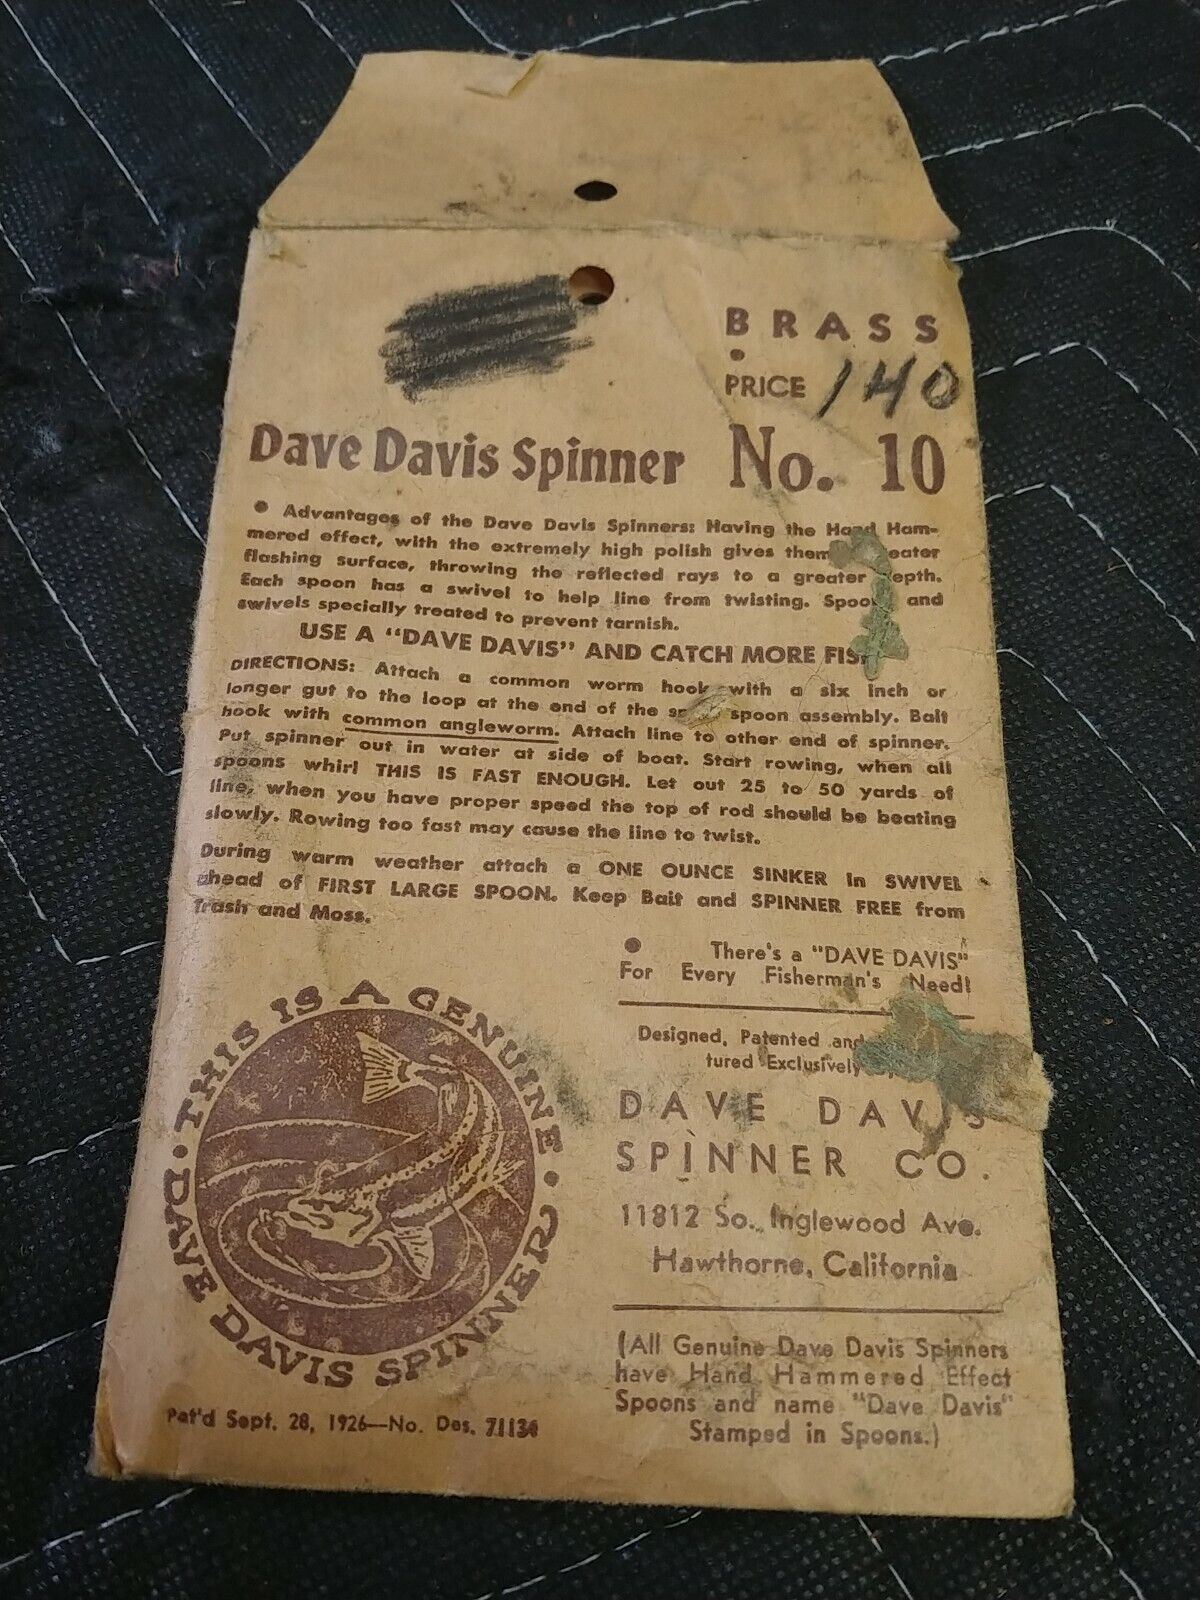 Vintage Dave Davis Trolling Spinners Lot Of 2 #10 Fishing Lures